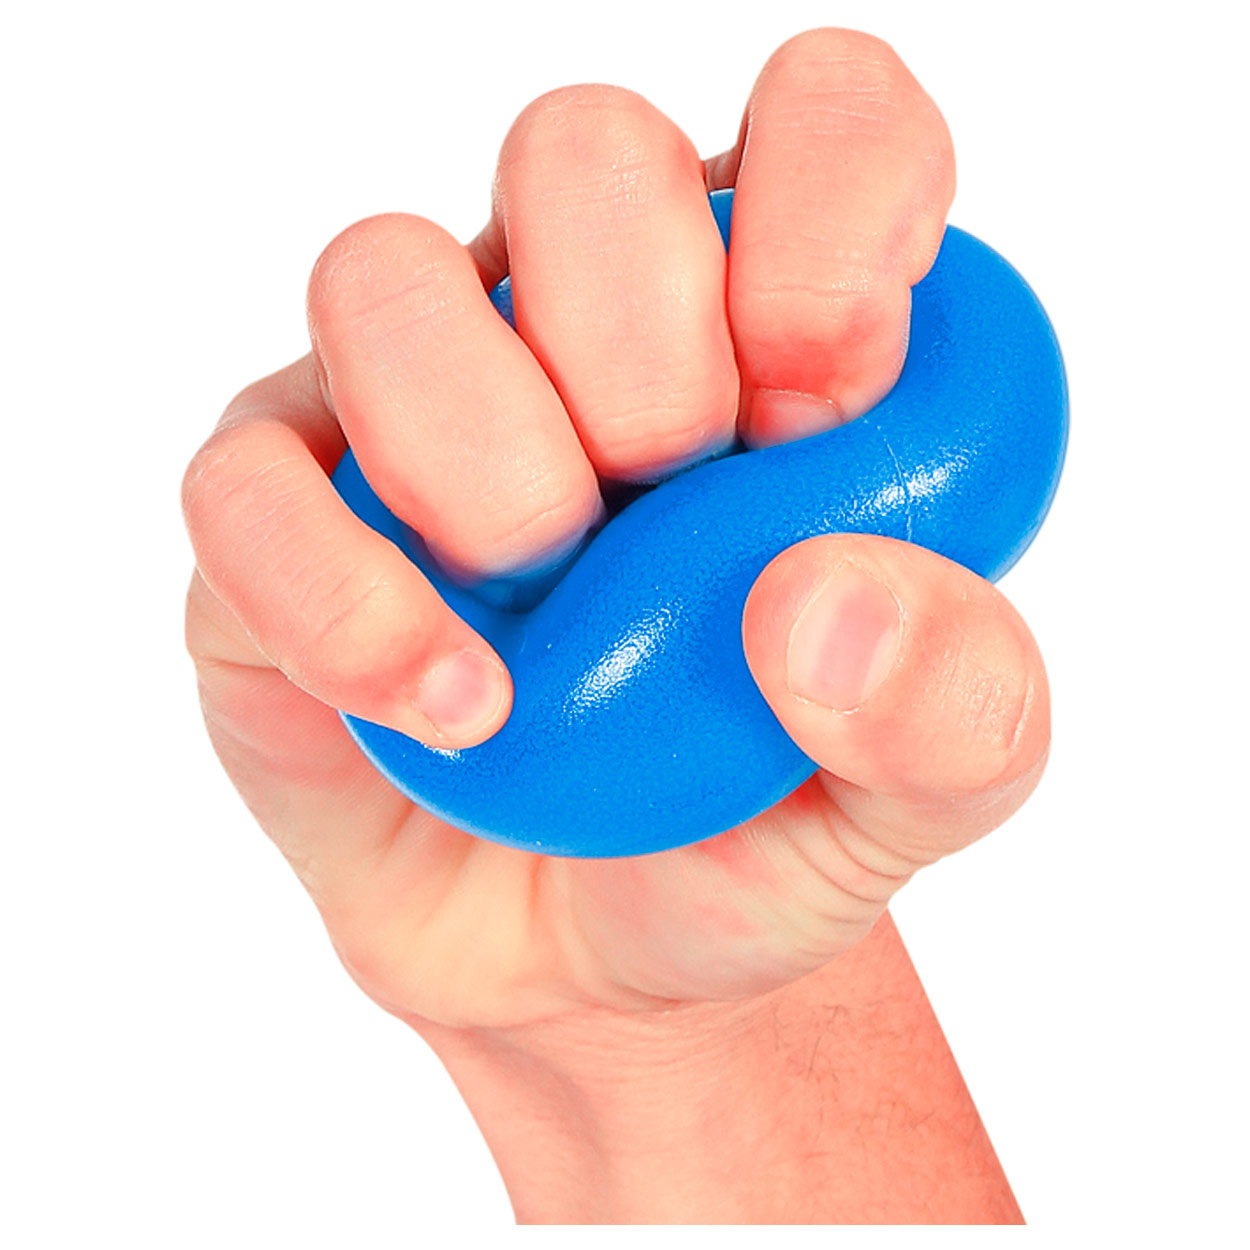 TOGU anti-stress ball inflated with air, Ø 6.5 cm buy ...